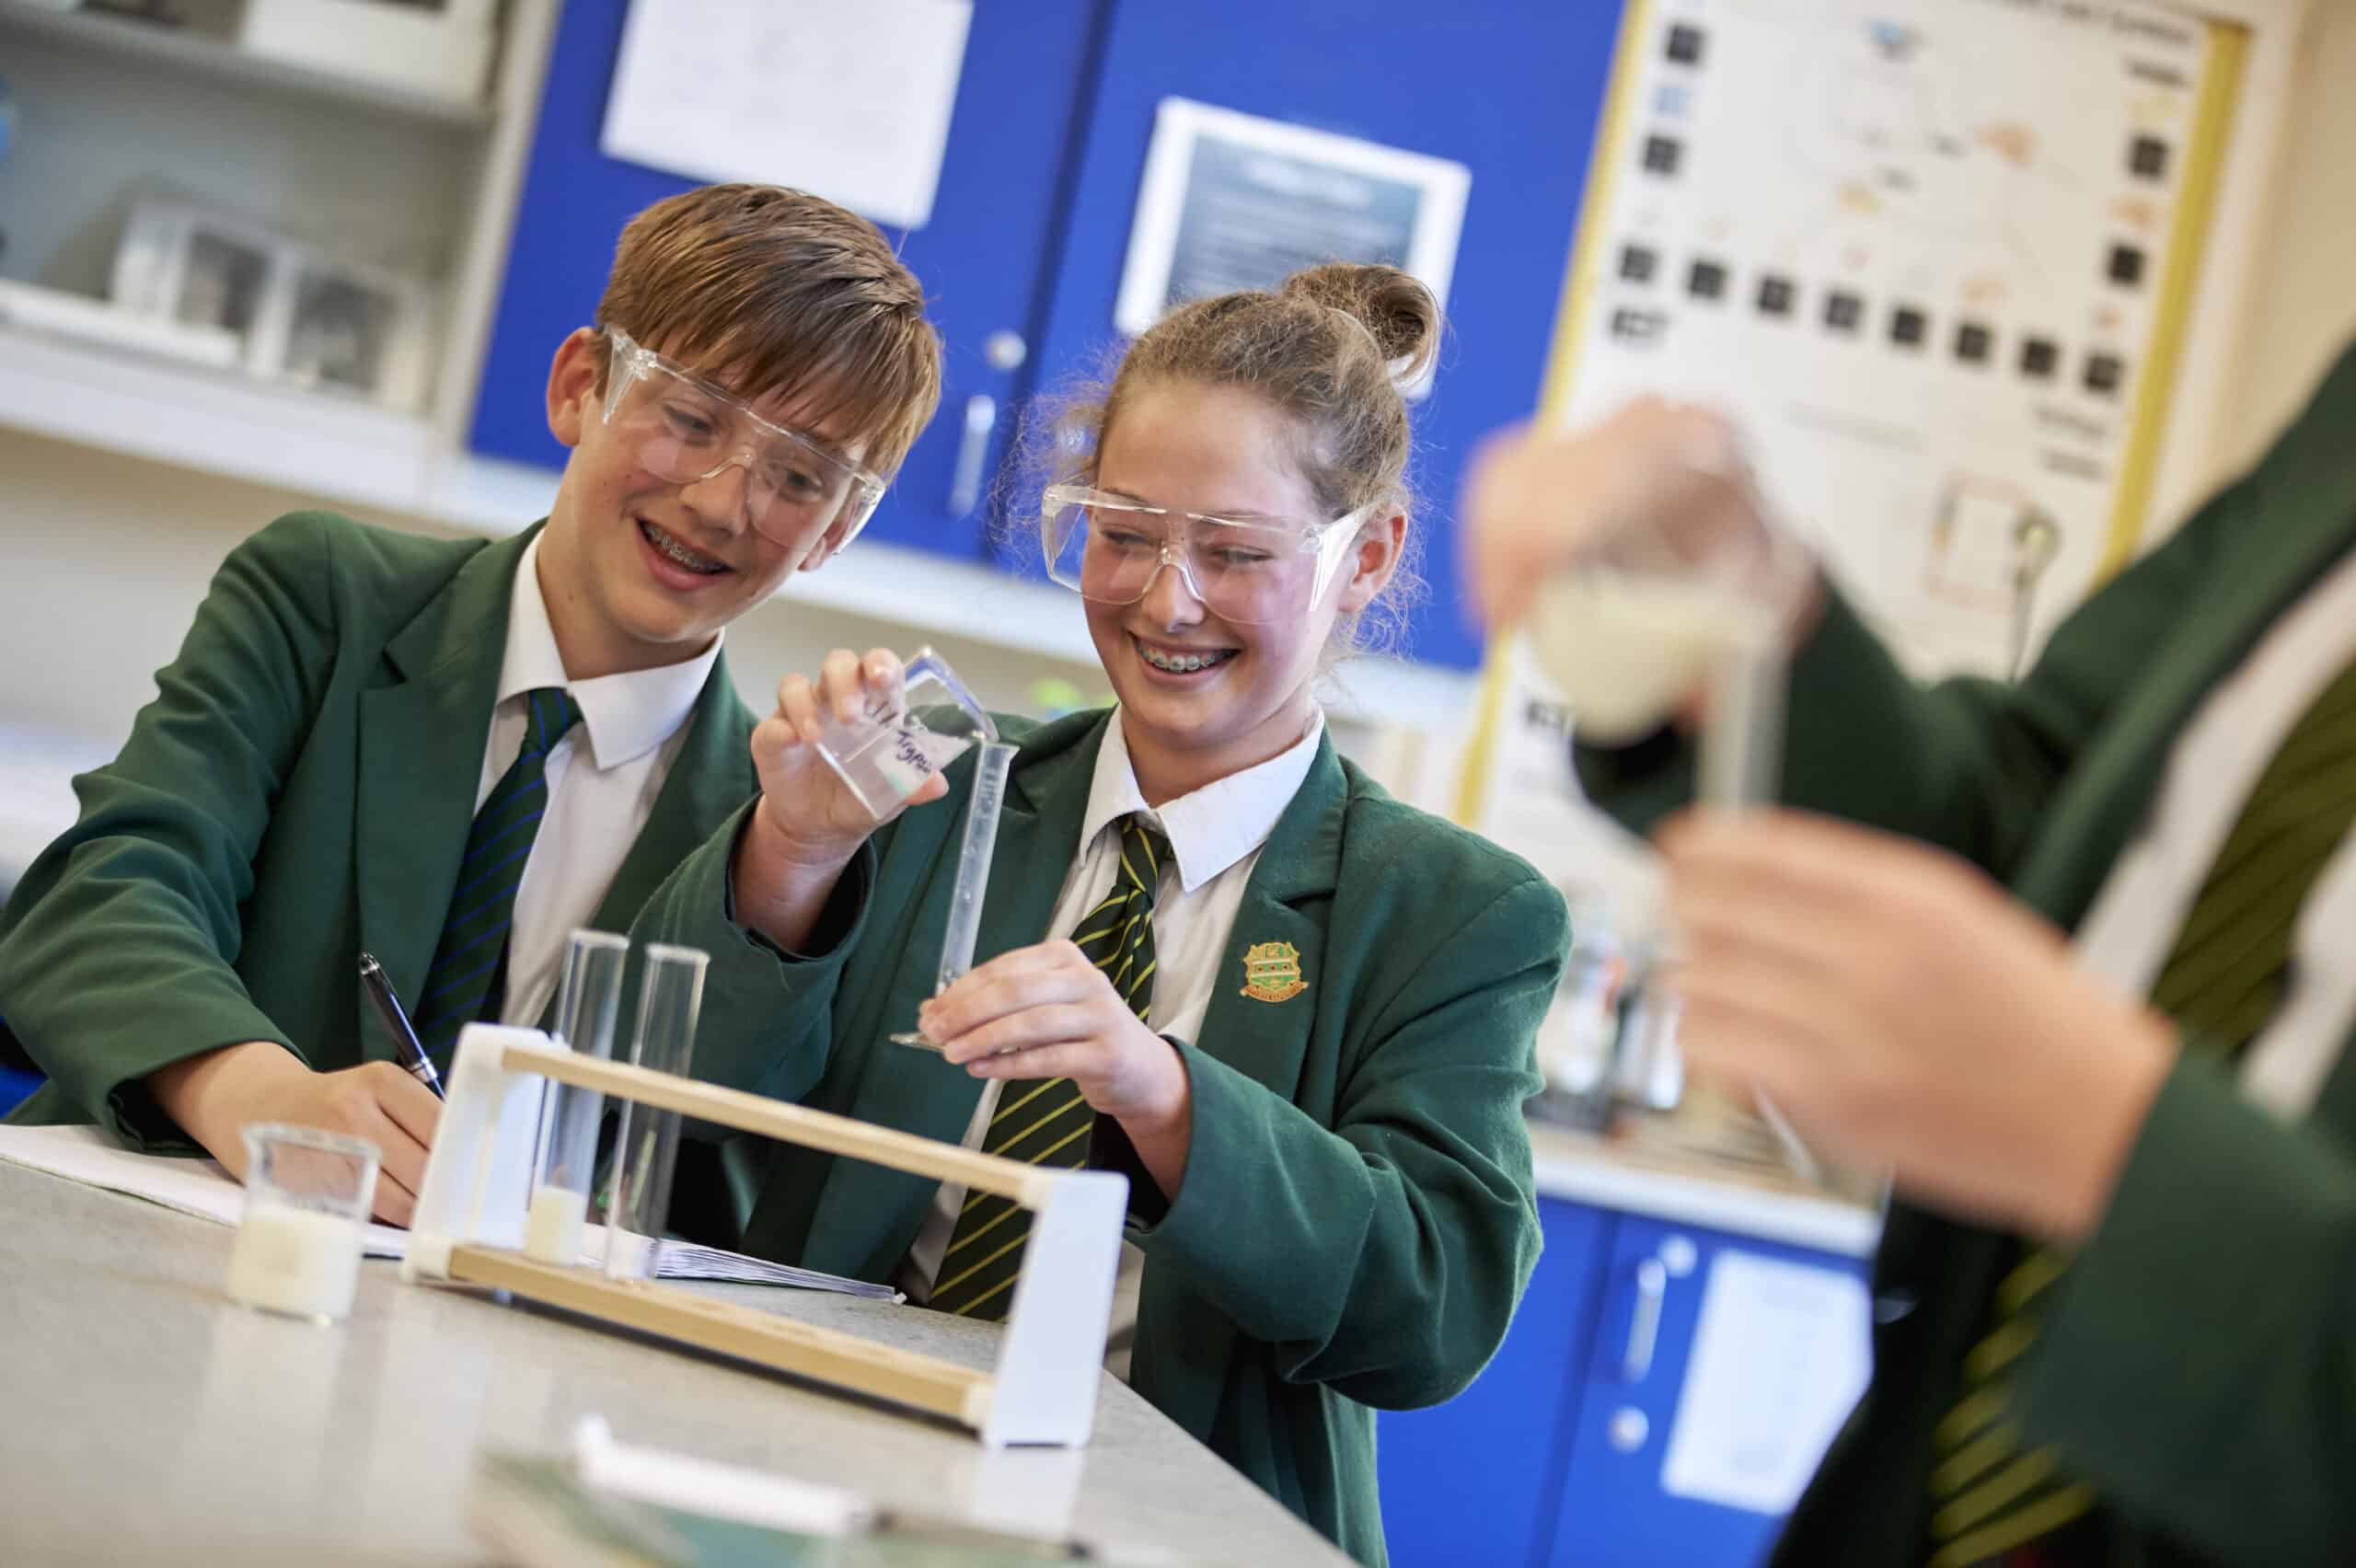 Farringtons School: Delivering a world-class education in a nurturing environment